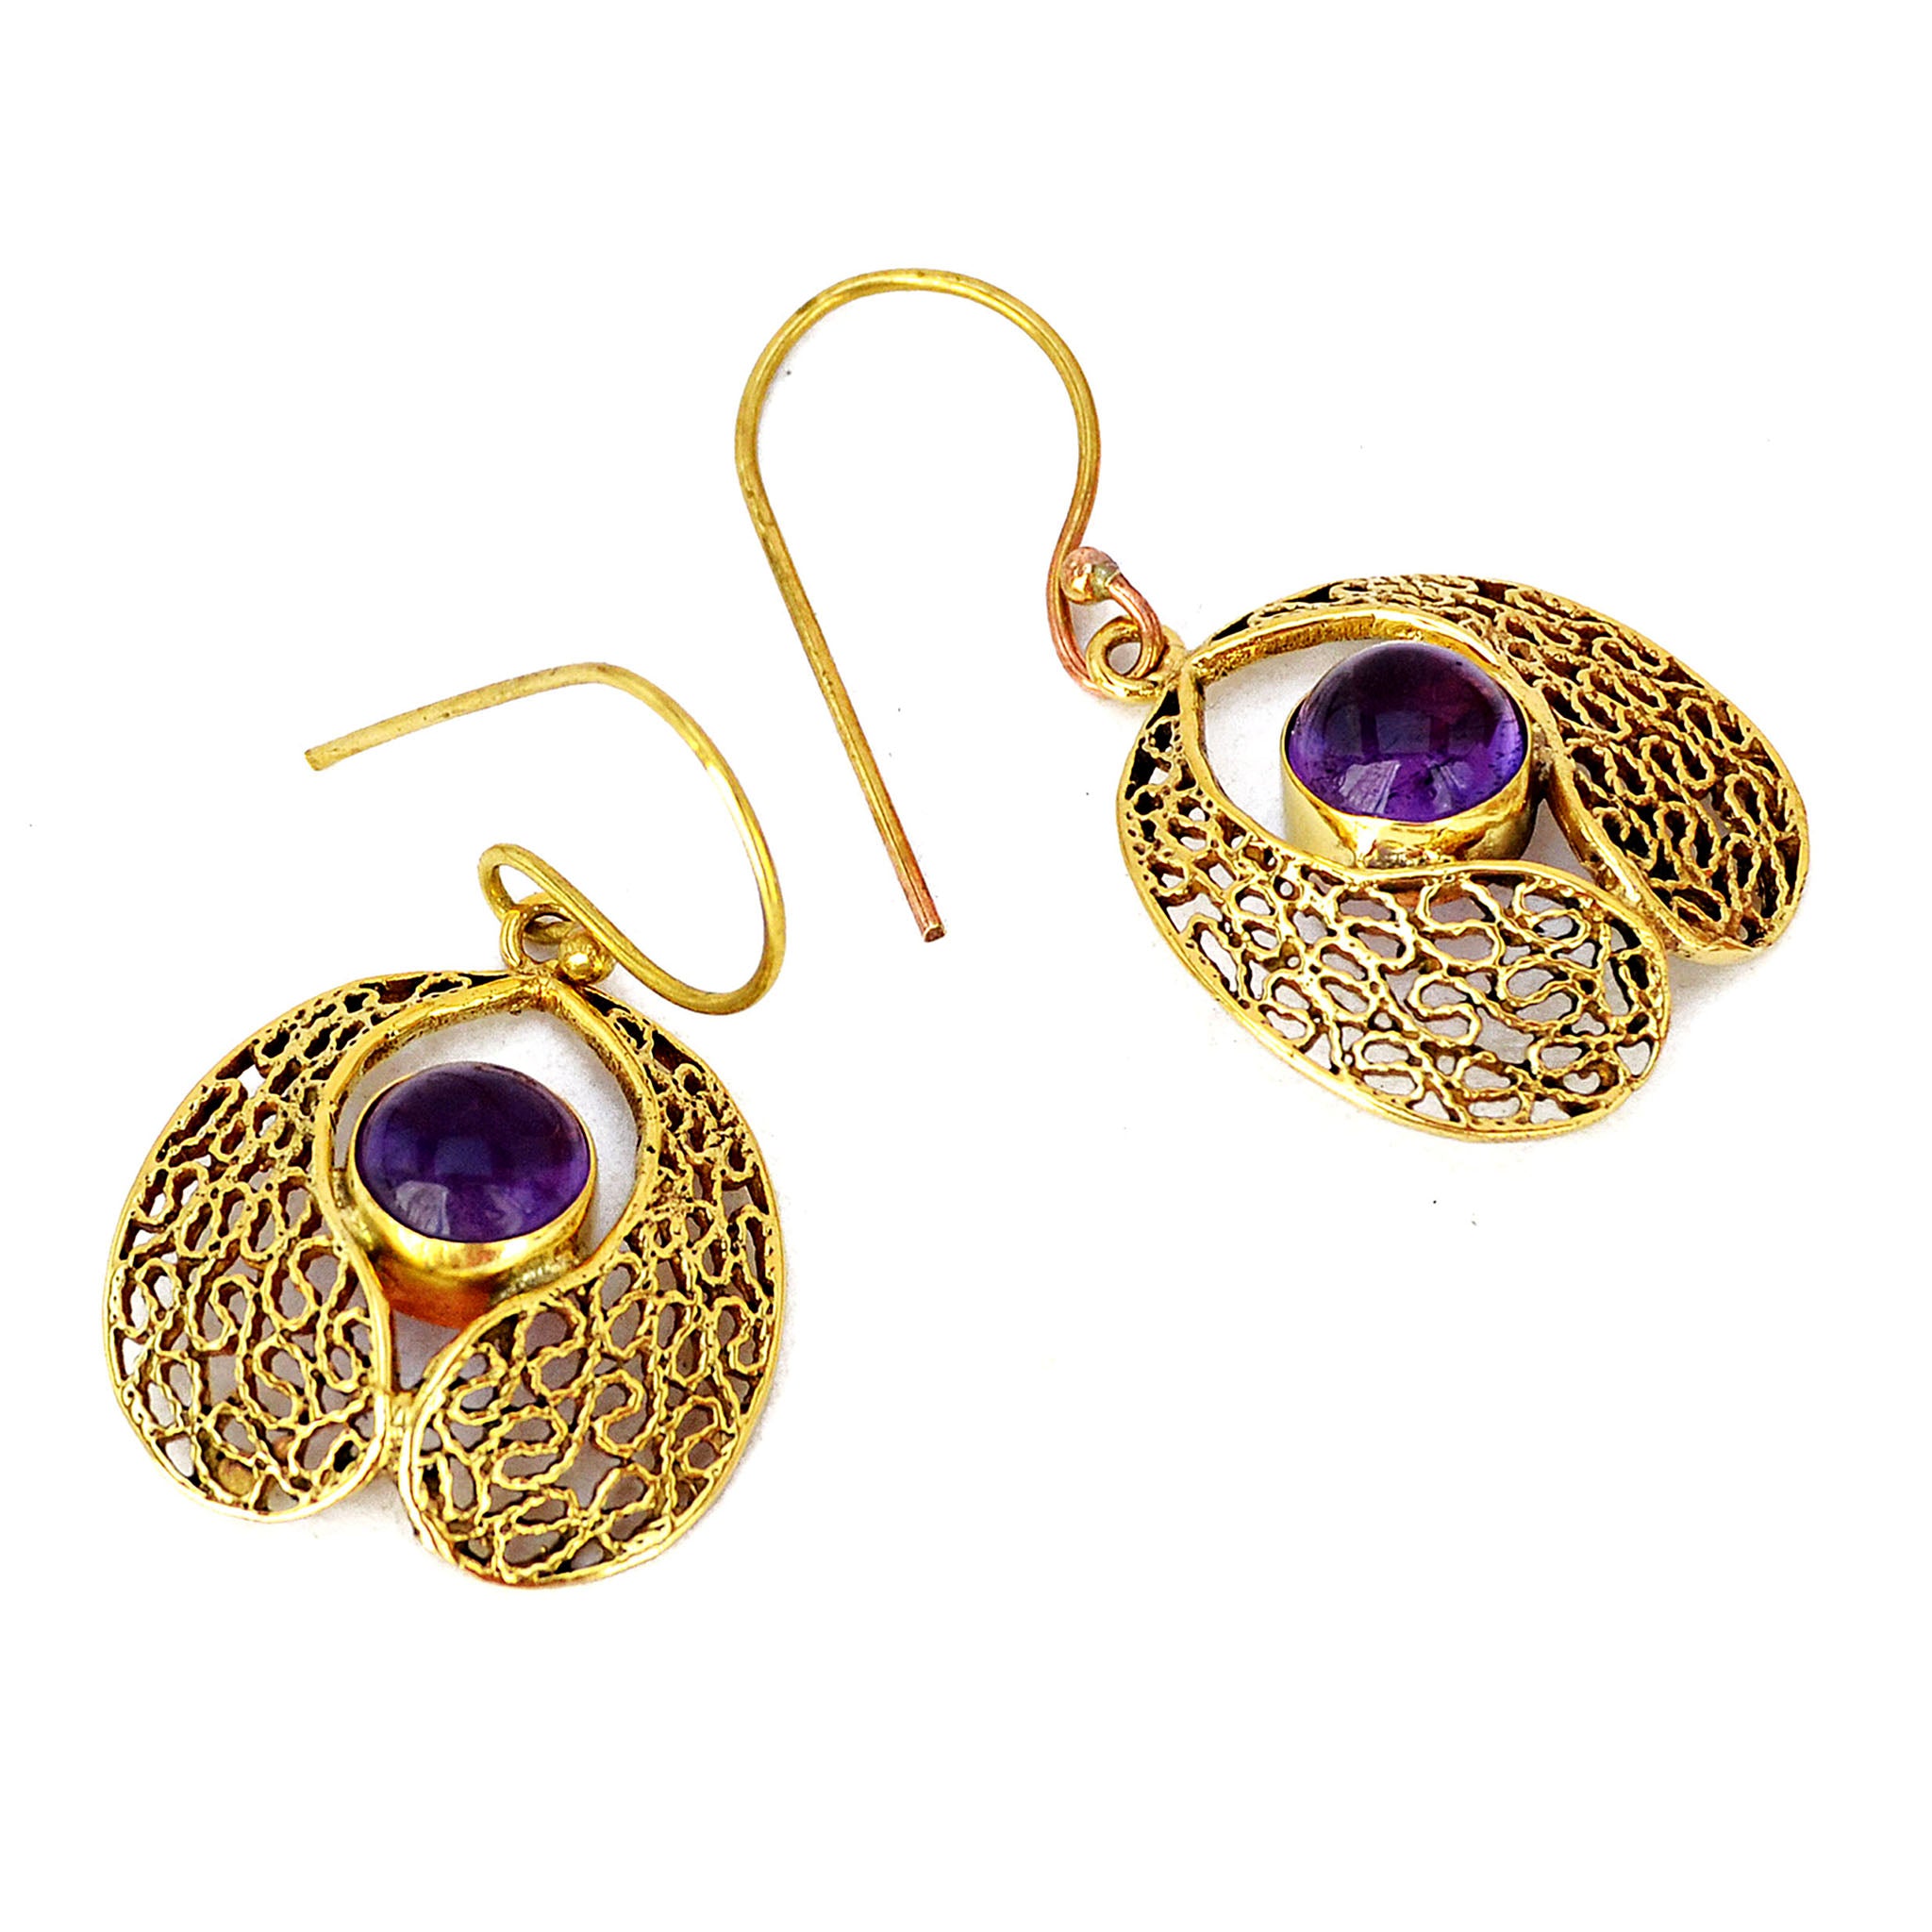 Gold filigree earrings with amethyst